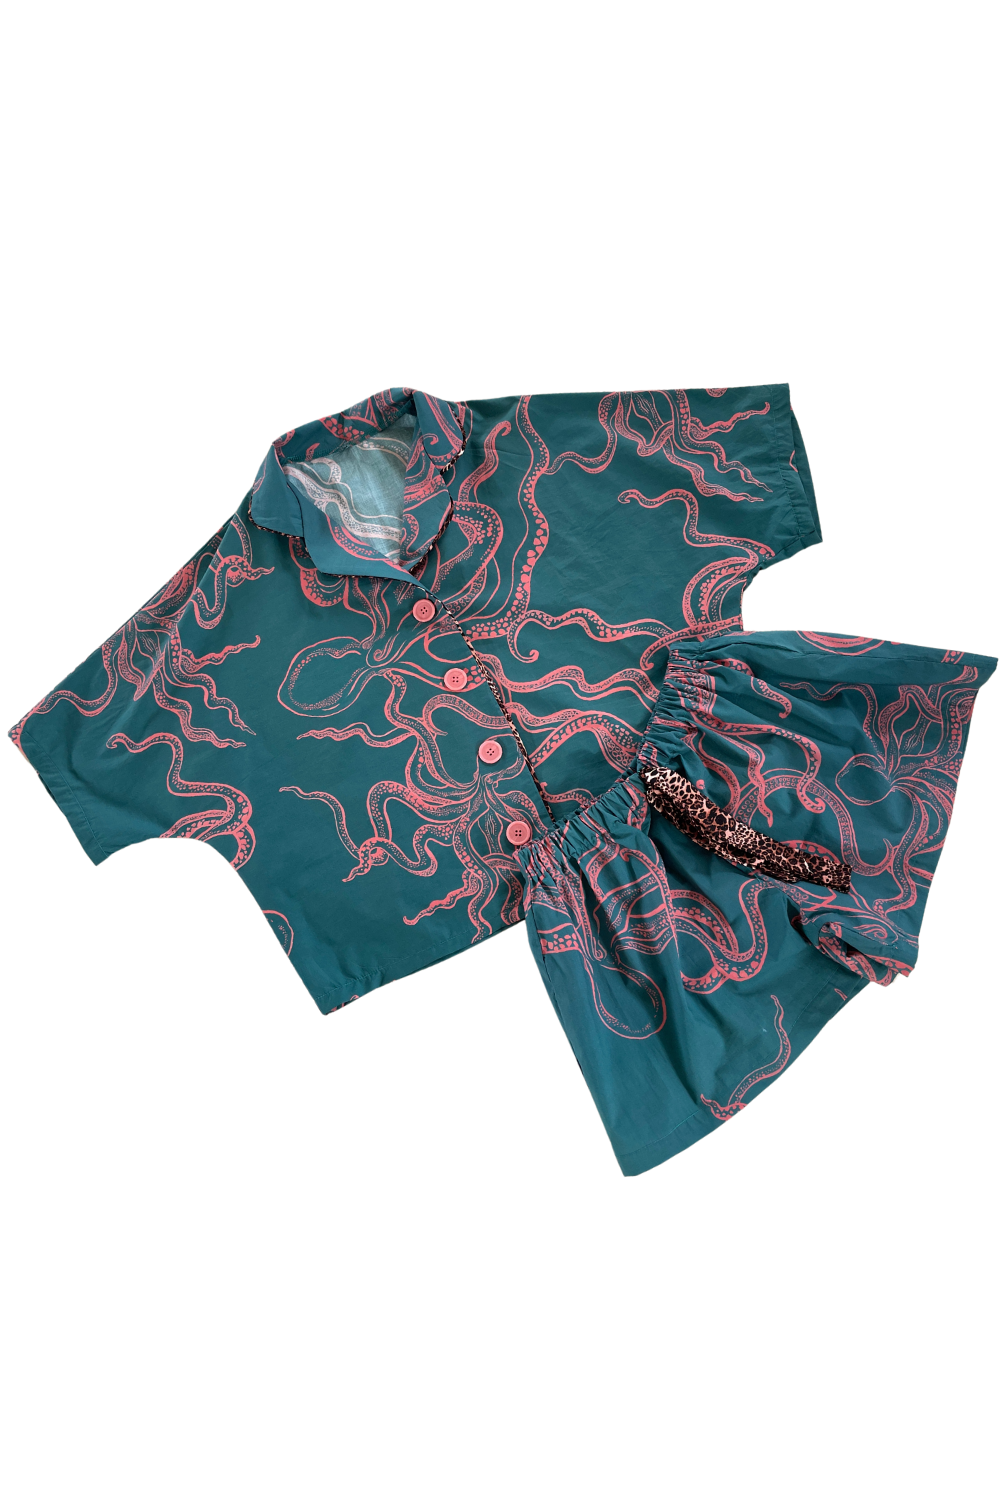 Octopus Two Piece Pajama Set Coral on Teal with Animal print